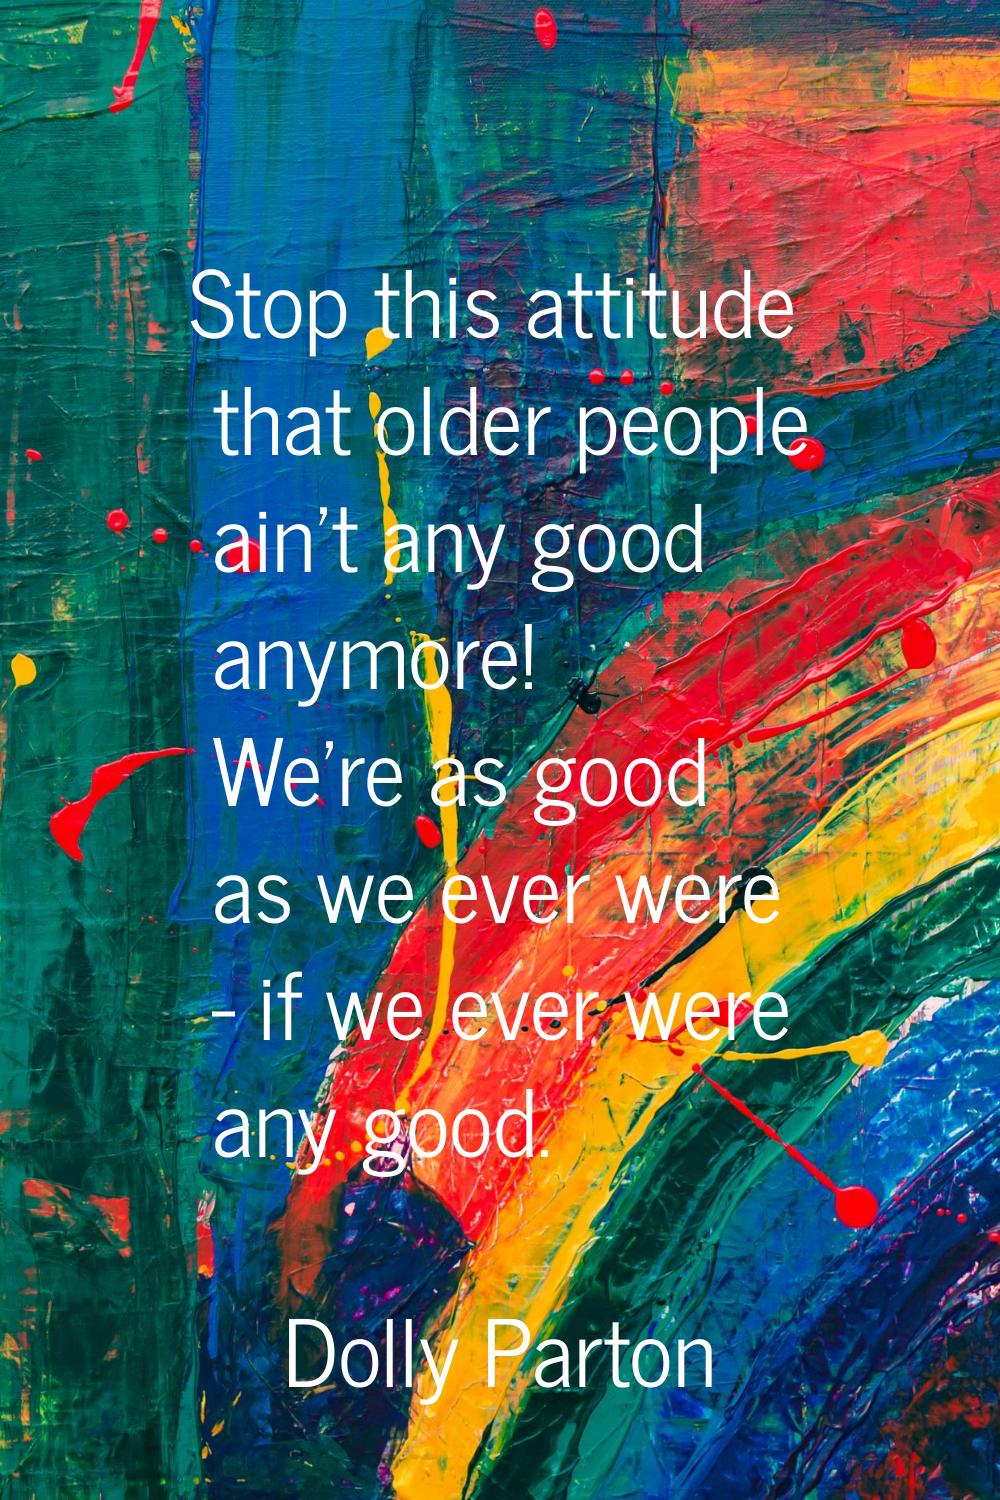 Stop this attitude that older people ain't any good anymore! We're as good as we ever were - if we 